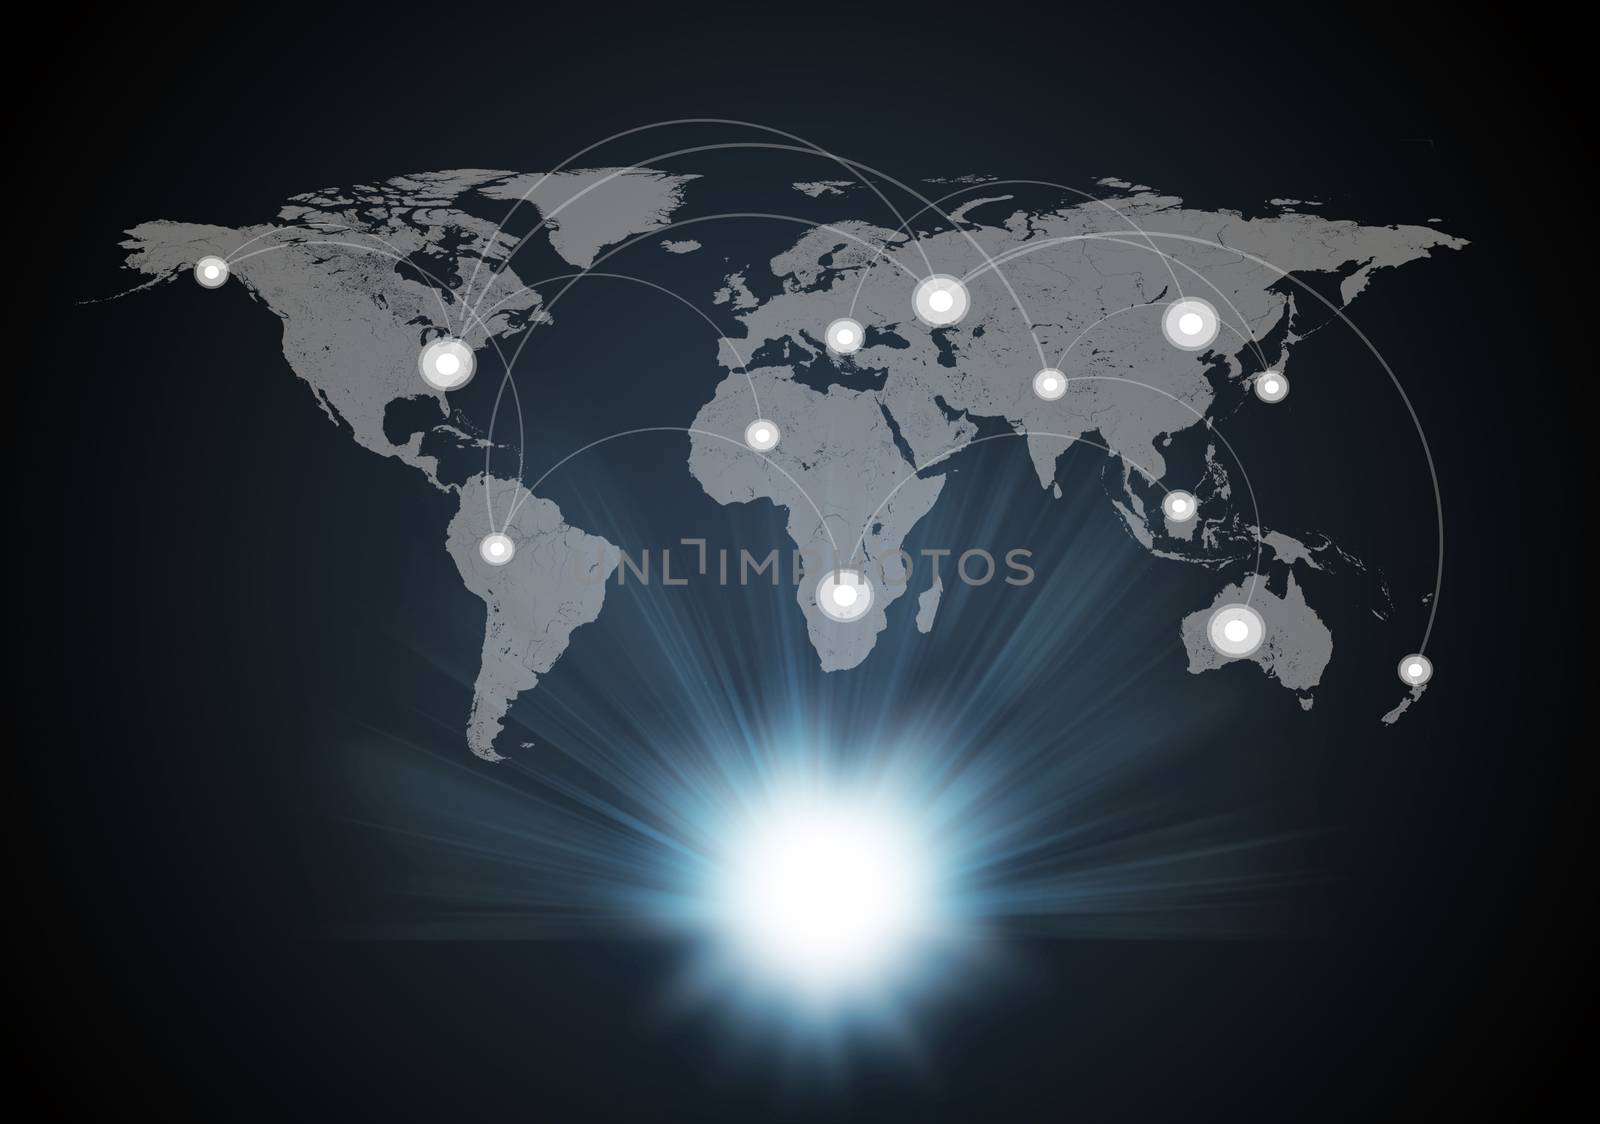 Image of world map with bright spotlight